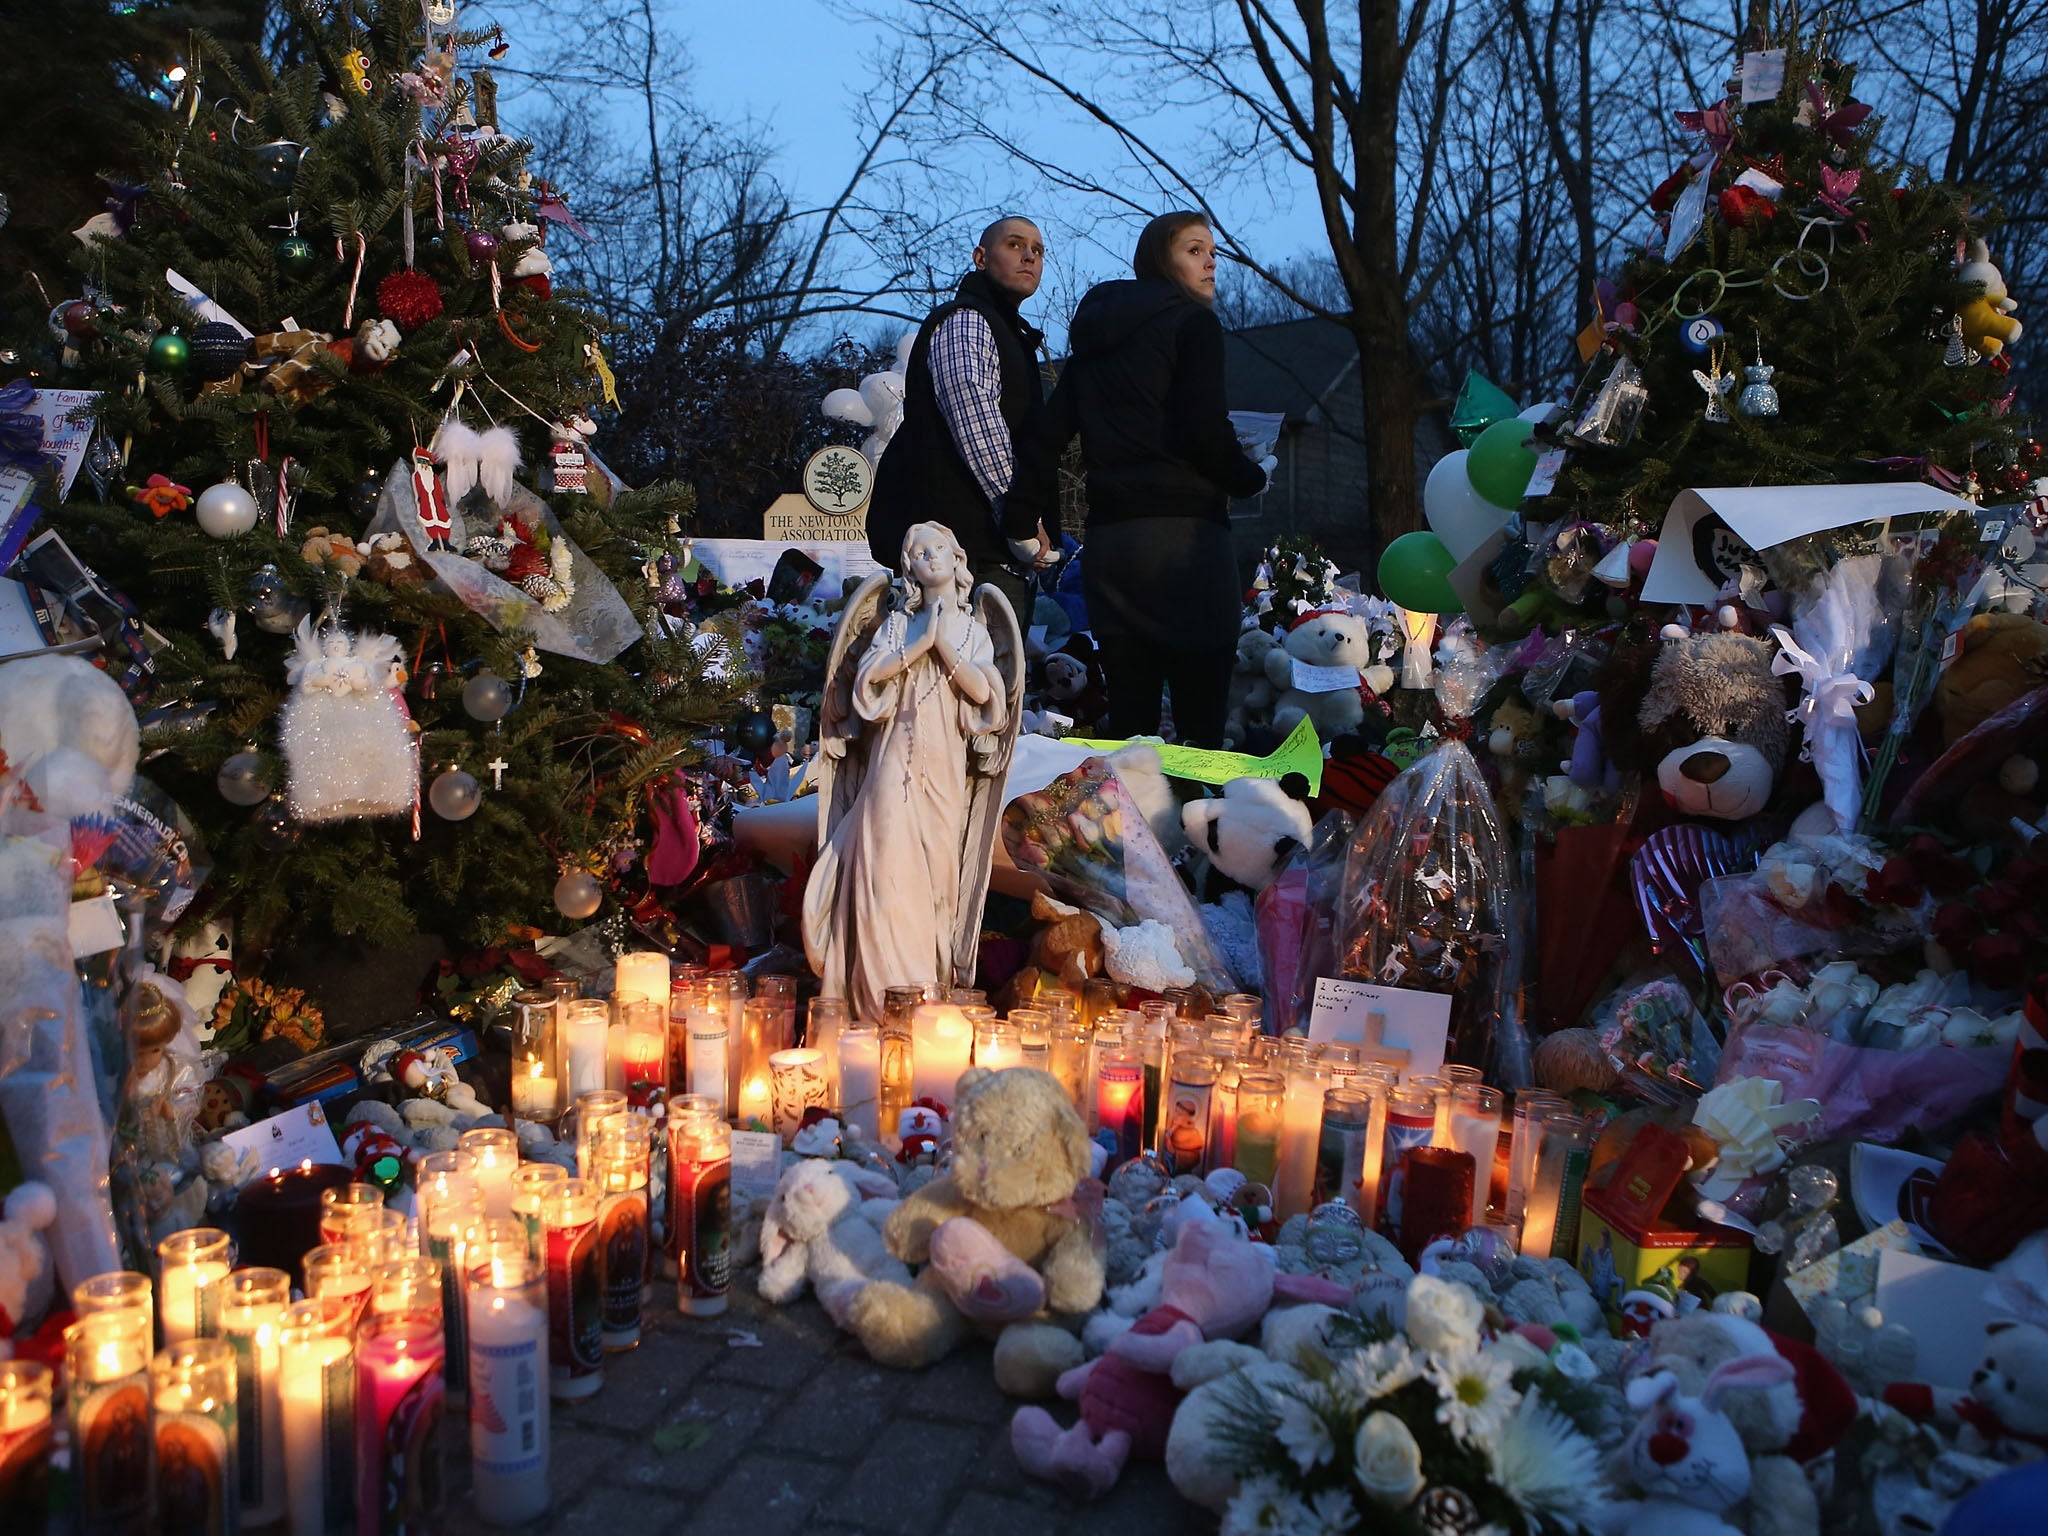 The Newtown community continues to mourn